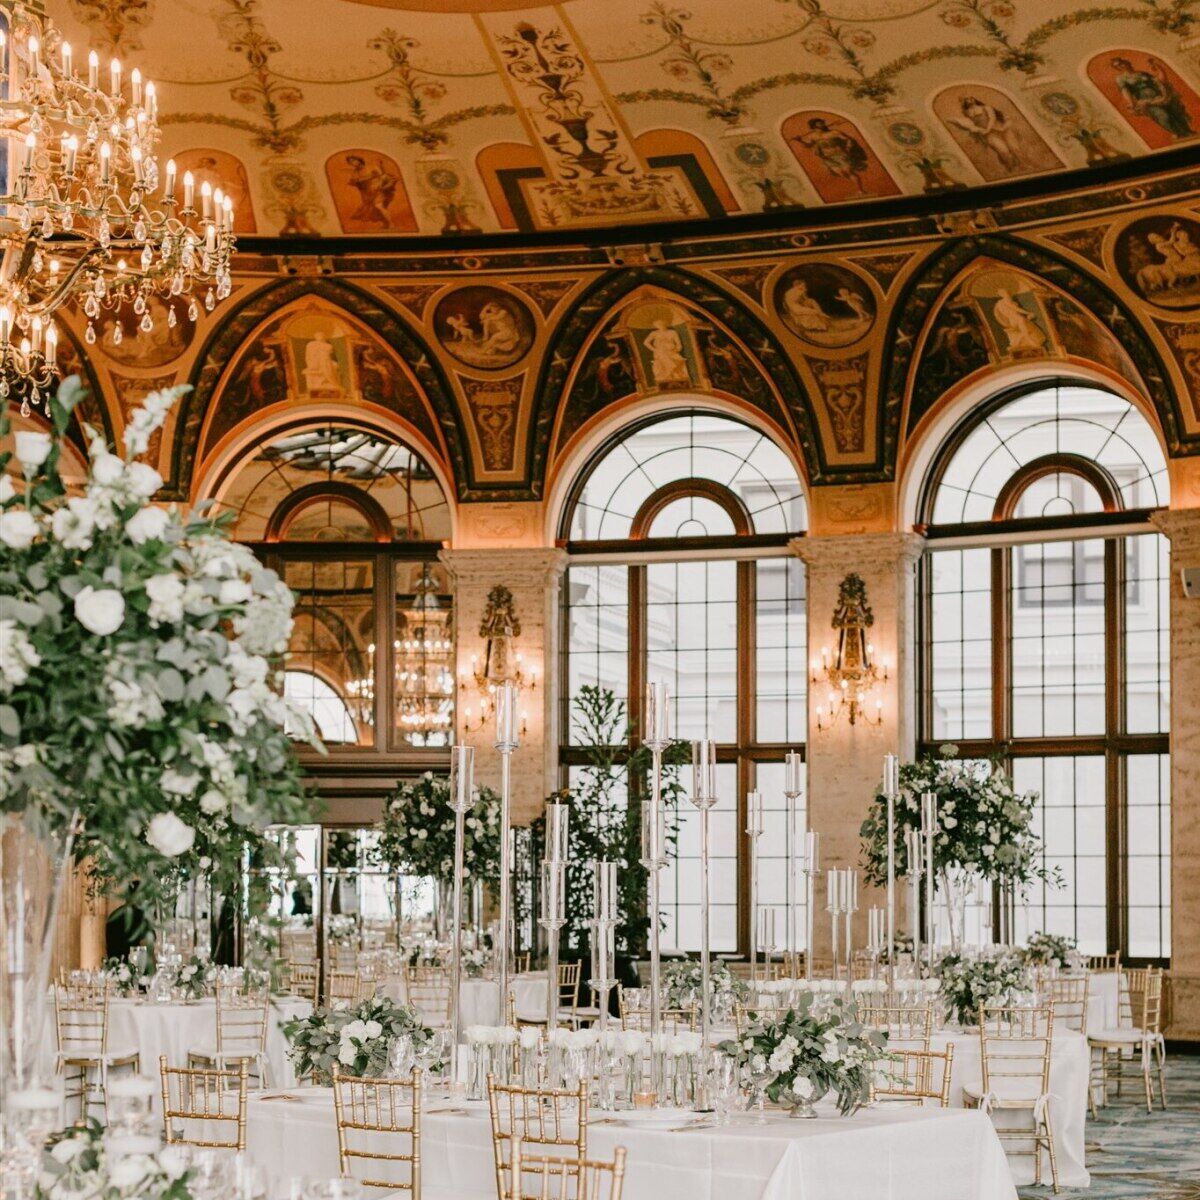 Charming Sites: Luxurious Historic Venues For Elegant Gala Dinners